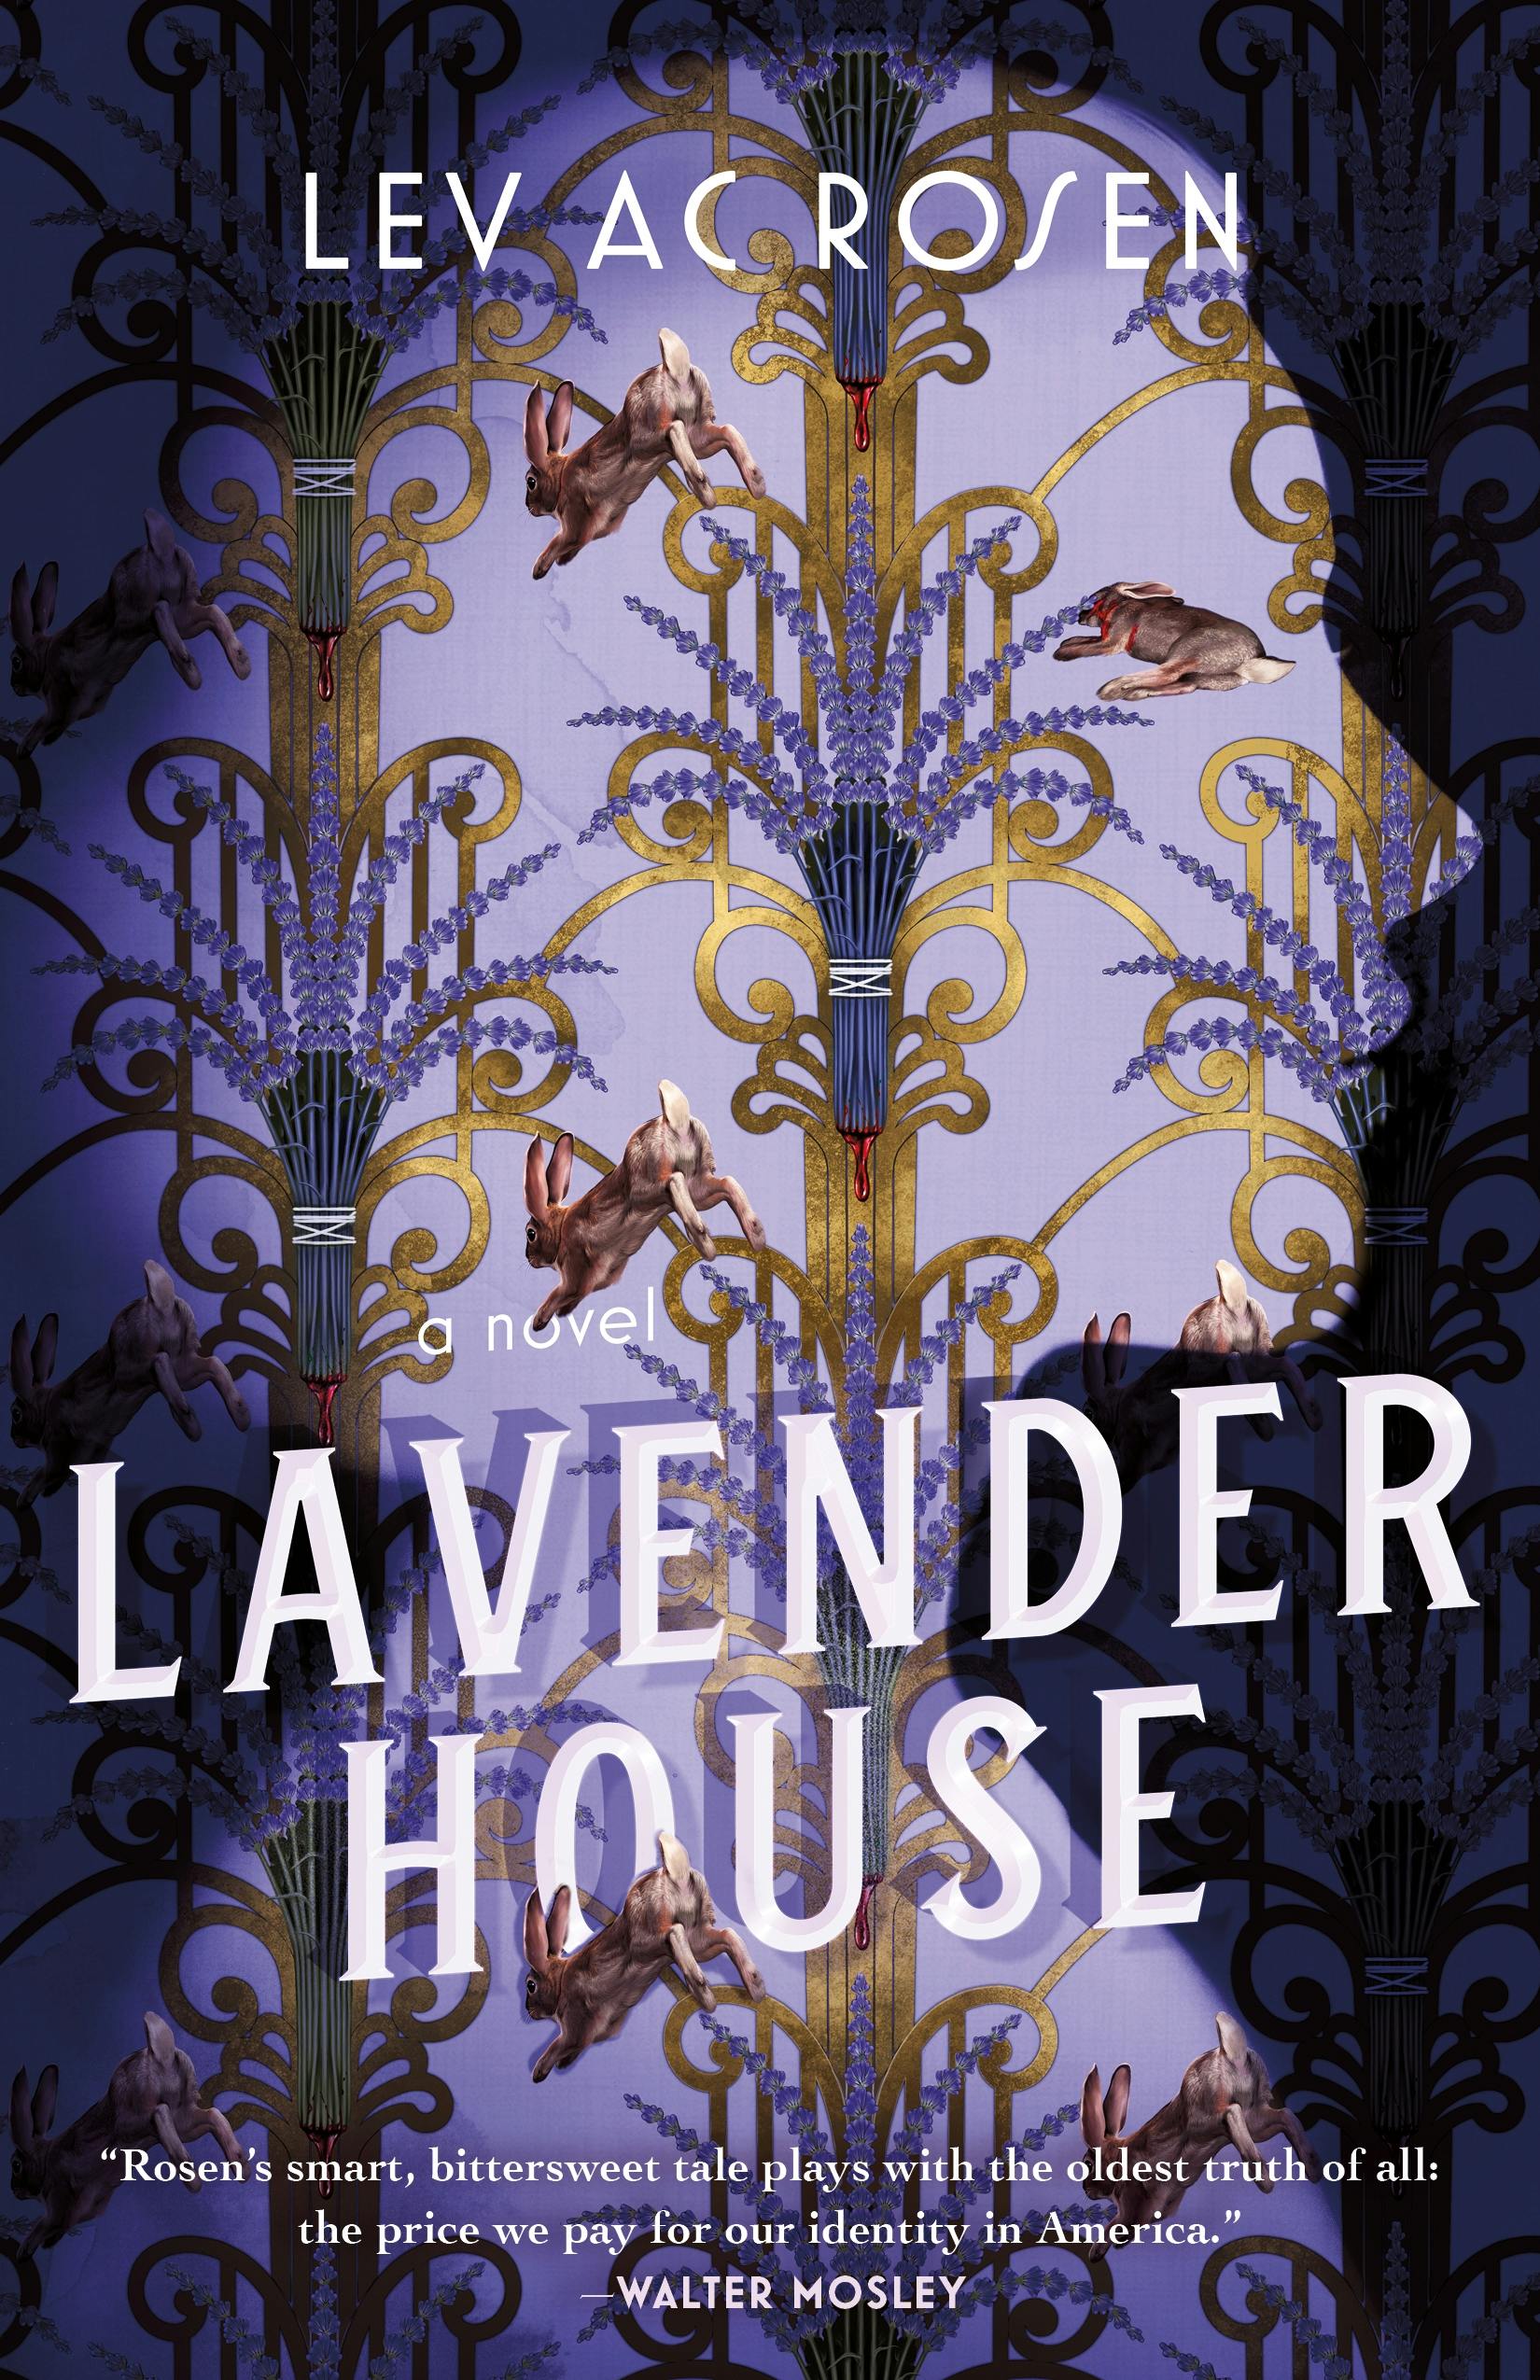 Cover for the book titled as: Lavender House